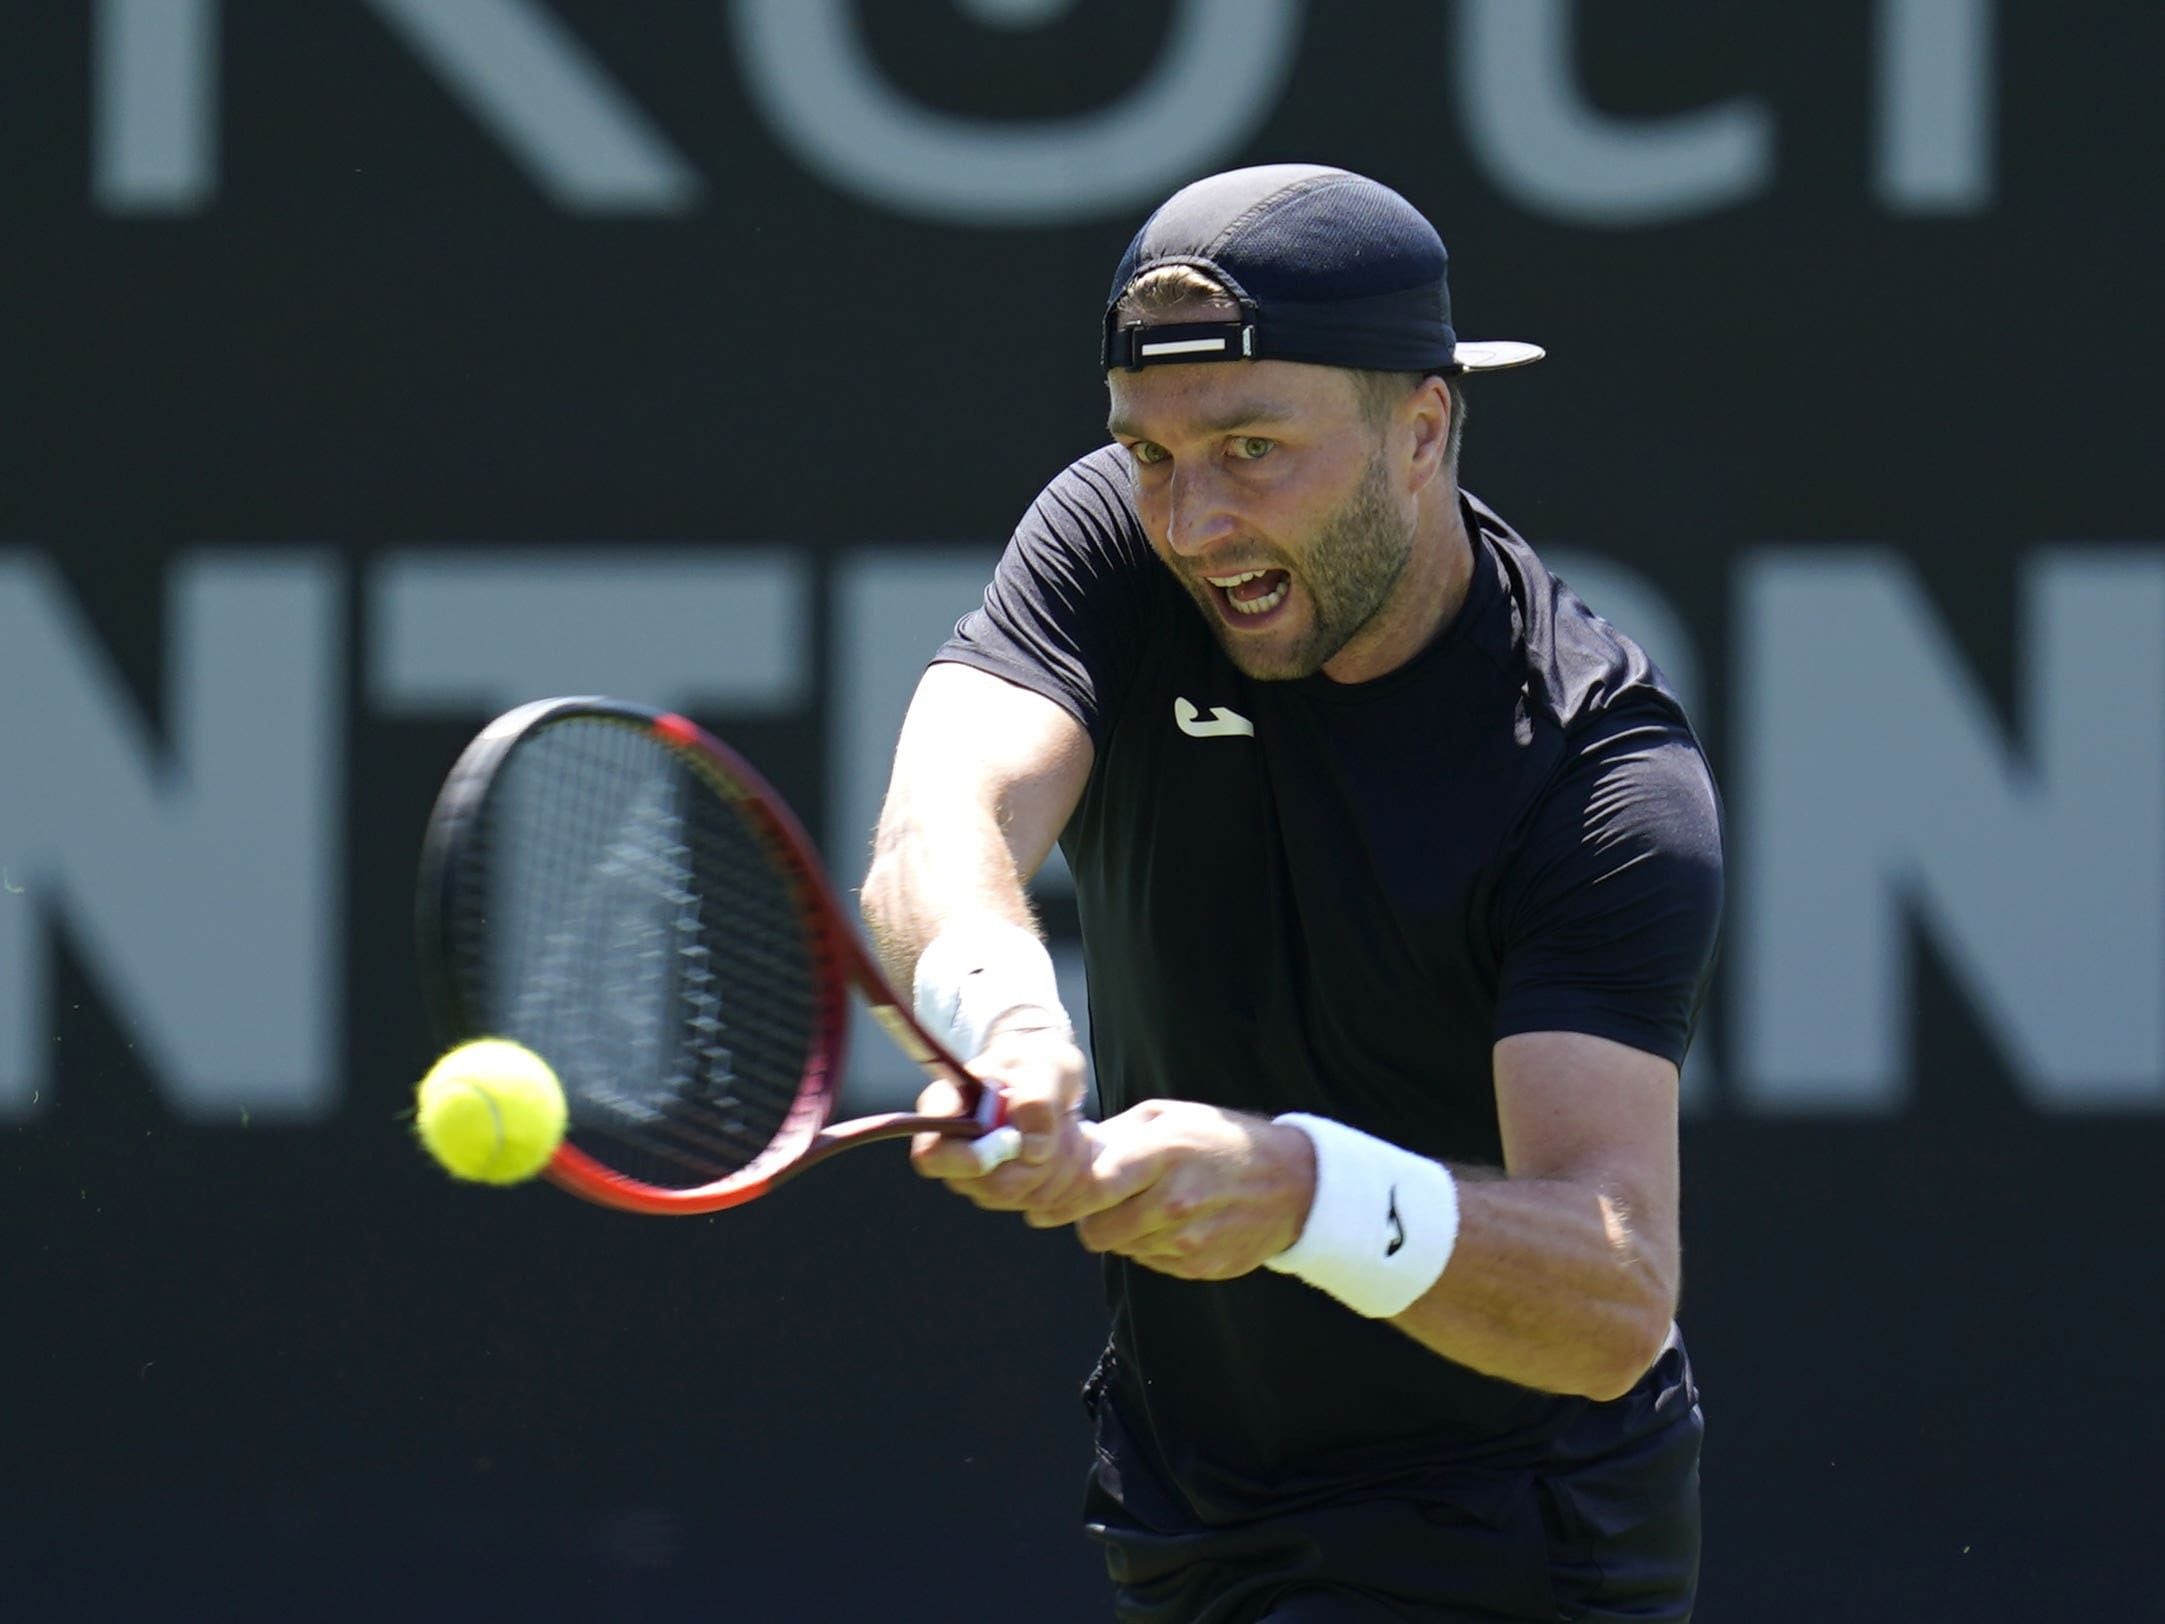 Liam Broady glad to make Wimbledon ‘in one piece’ after injury and concussion